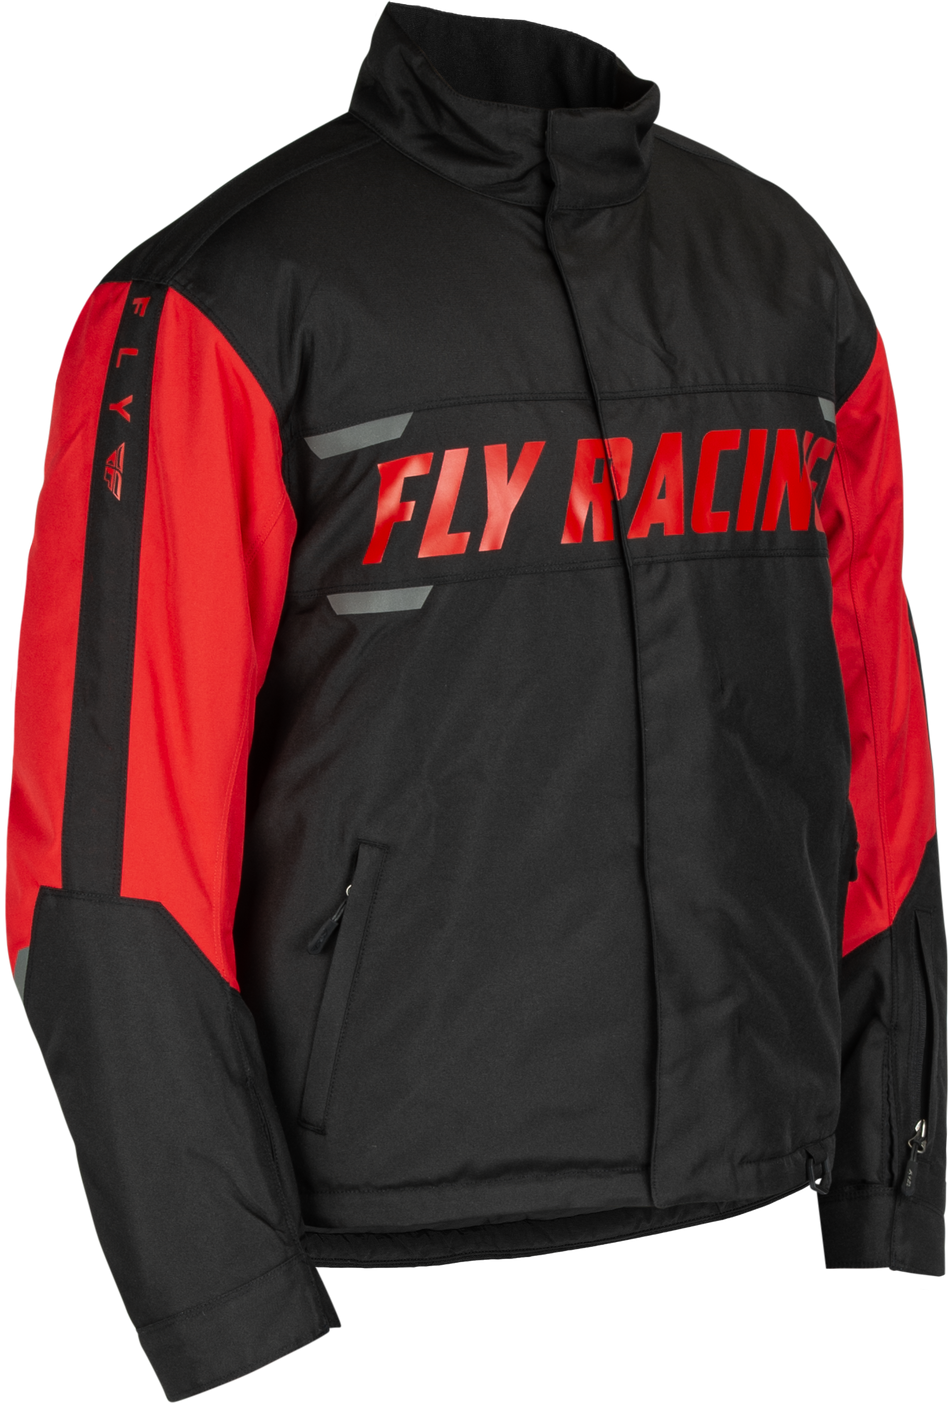 FLY RACING Outpost Jacket Black/Red Md 470-5502M